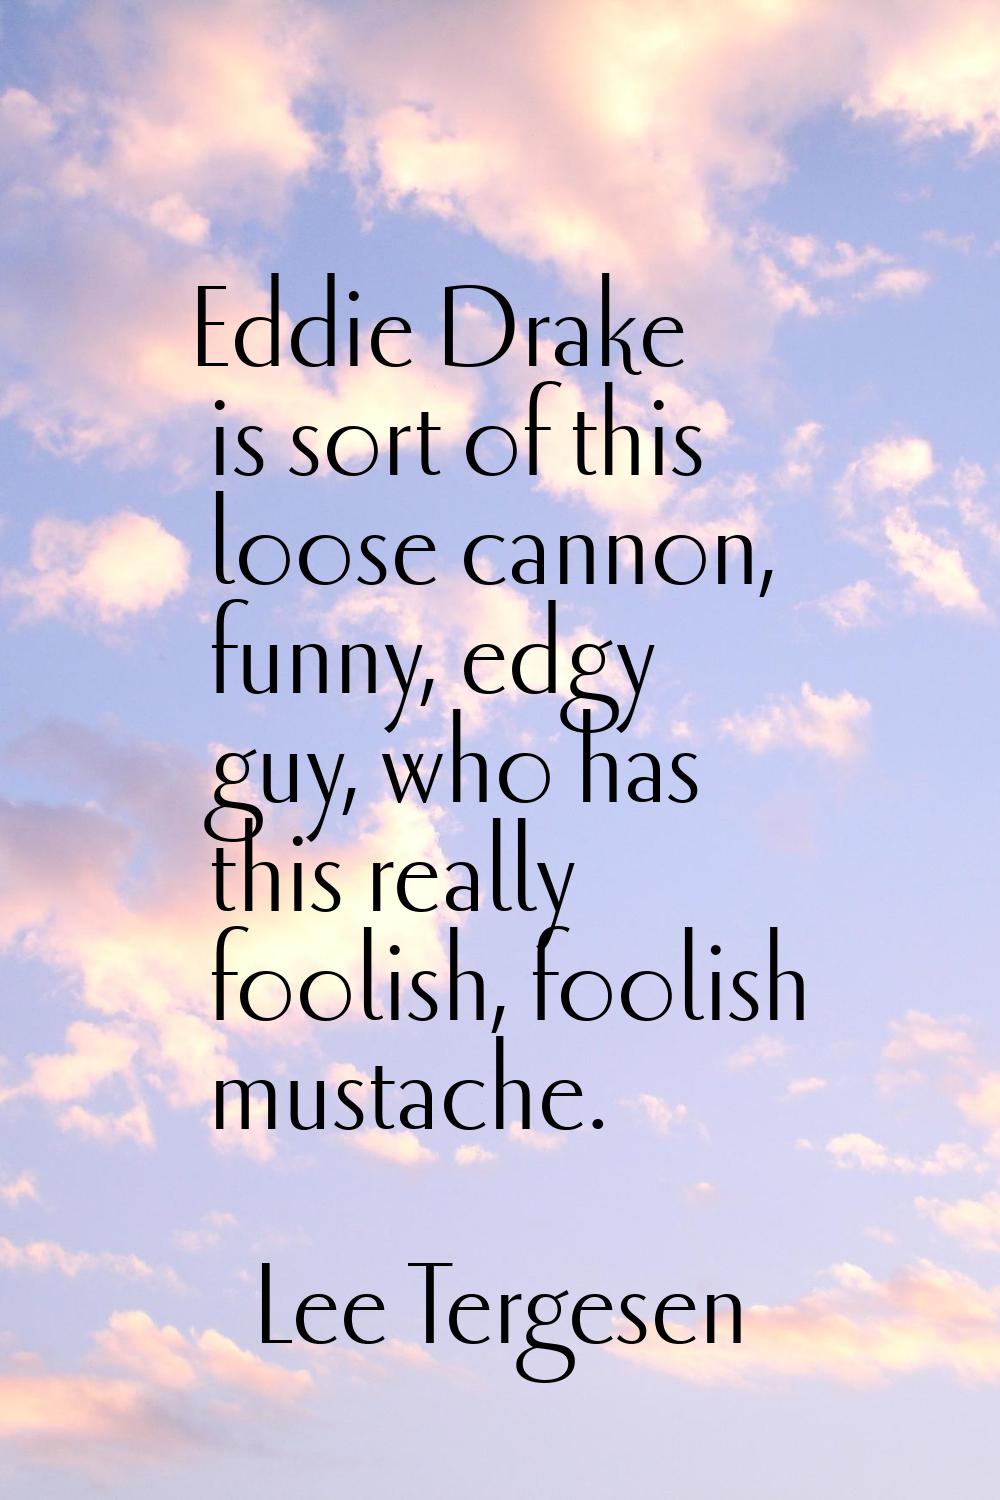 Eddie Drake is sort of this loose cannon, funny, edgy guy, who has this really foolish, foolish mus